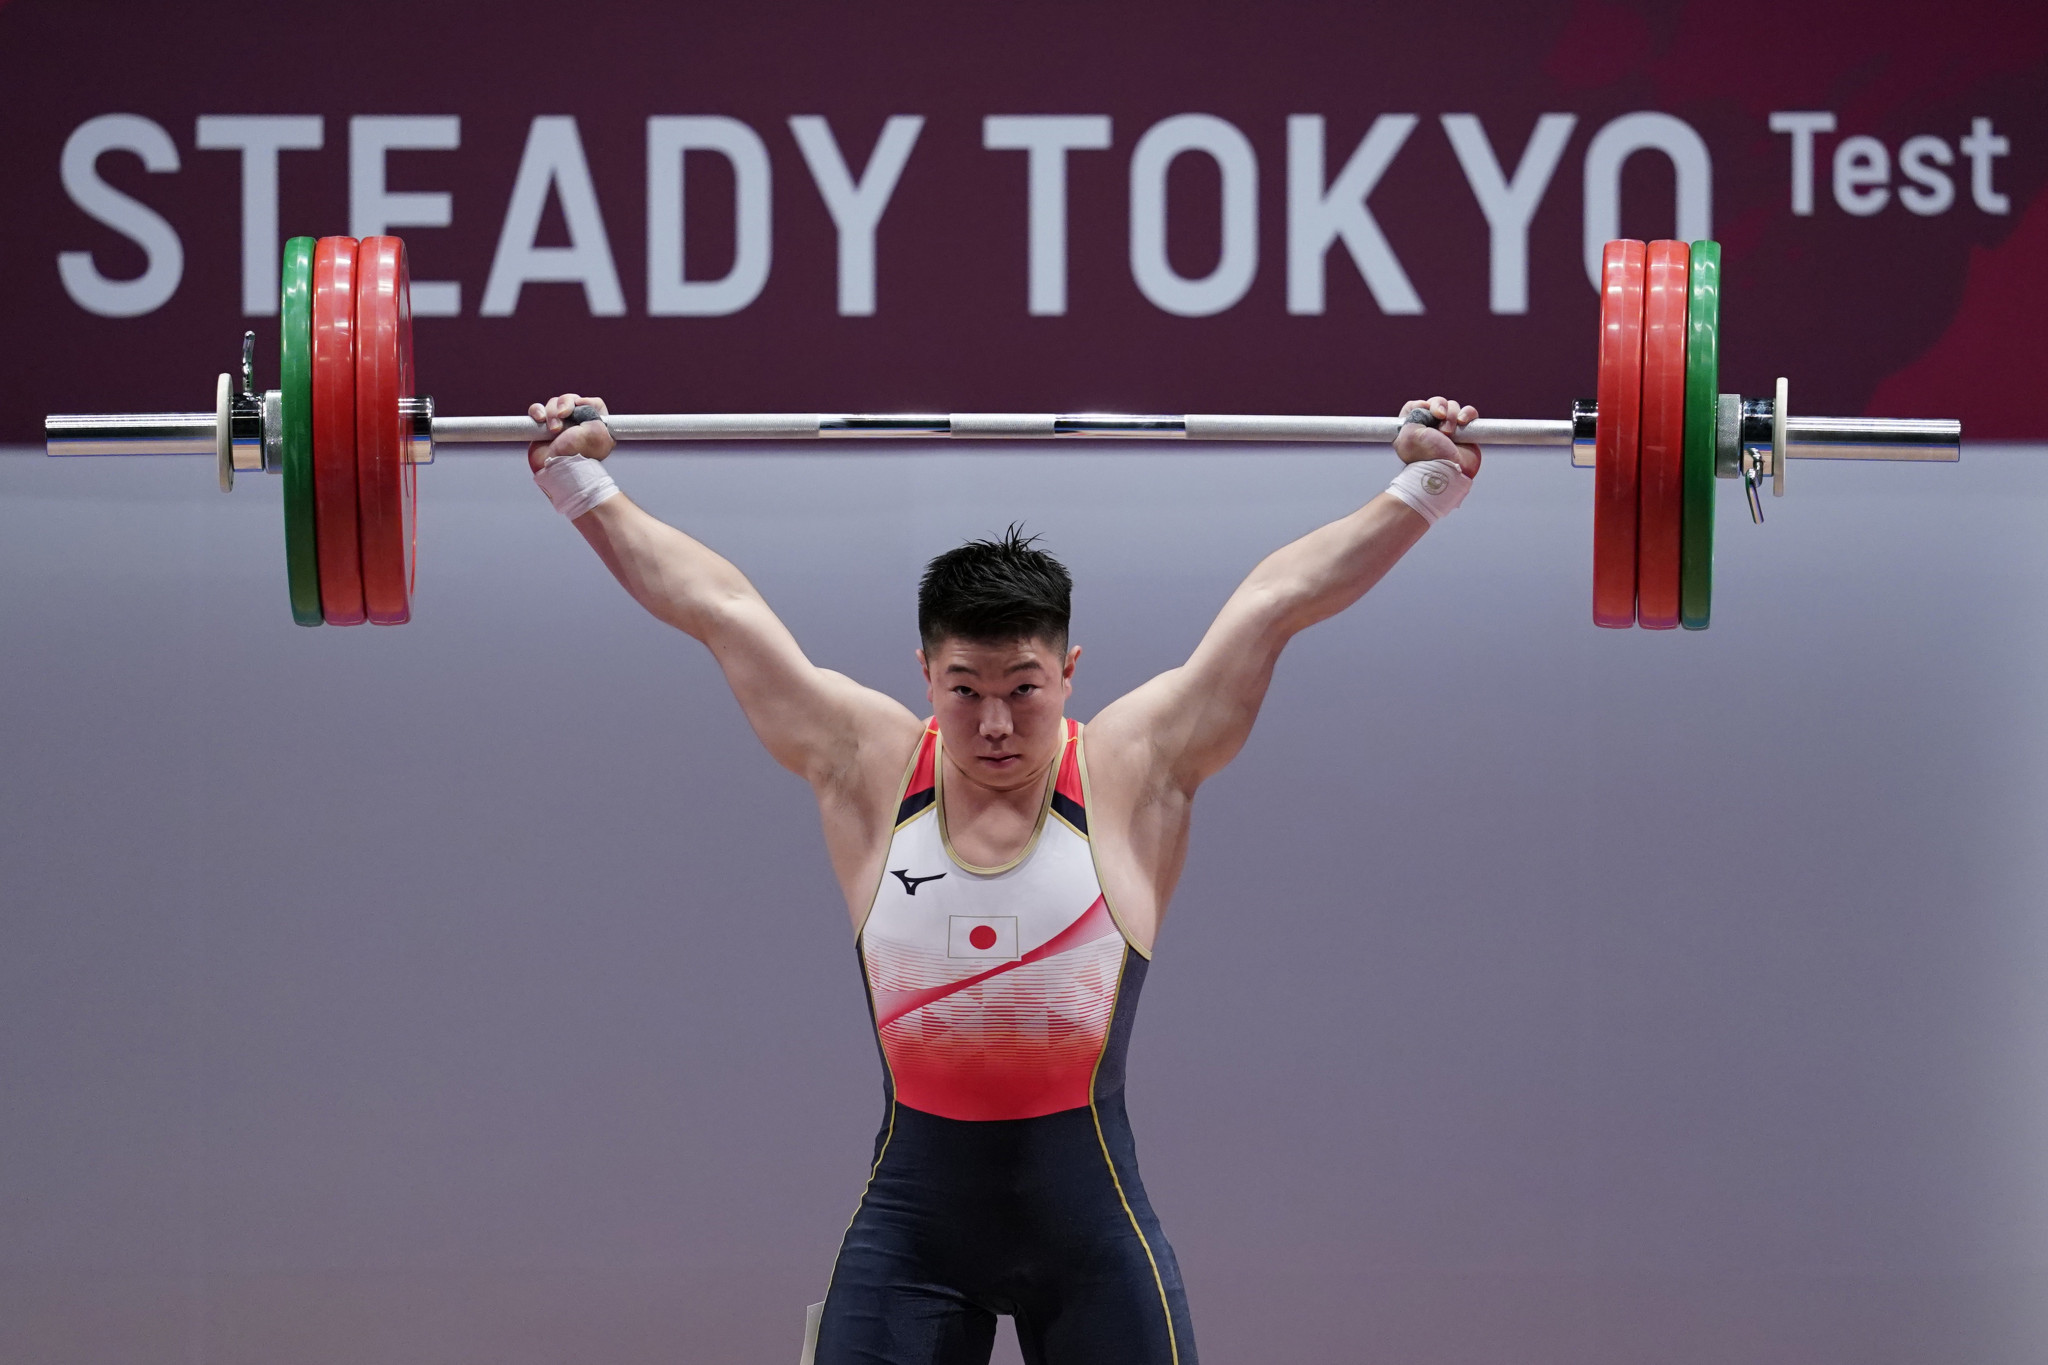 Masanori Miyamoto of Japan competes in the men's 73kg on day one of the Ready Steady Tokyo test event ©Getty Images